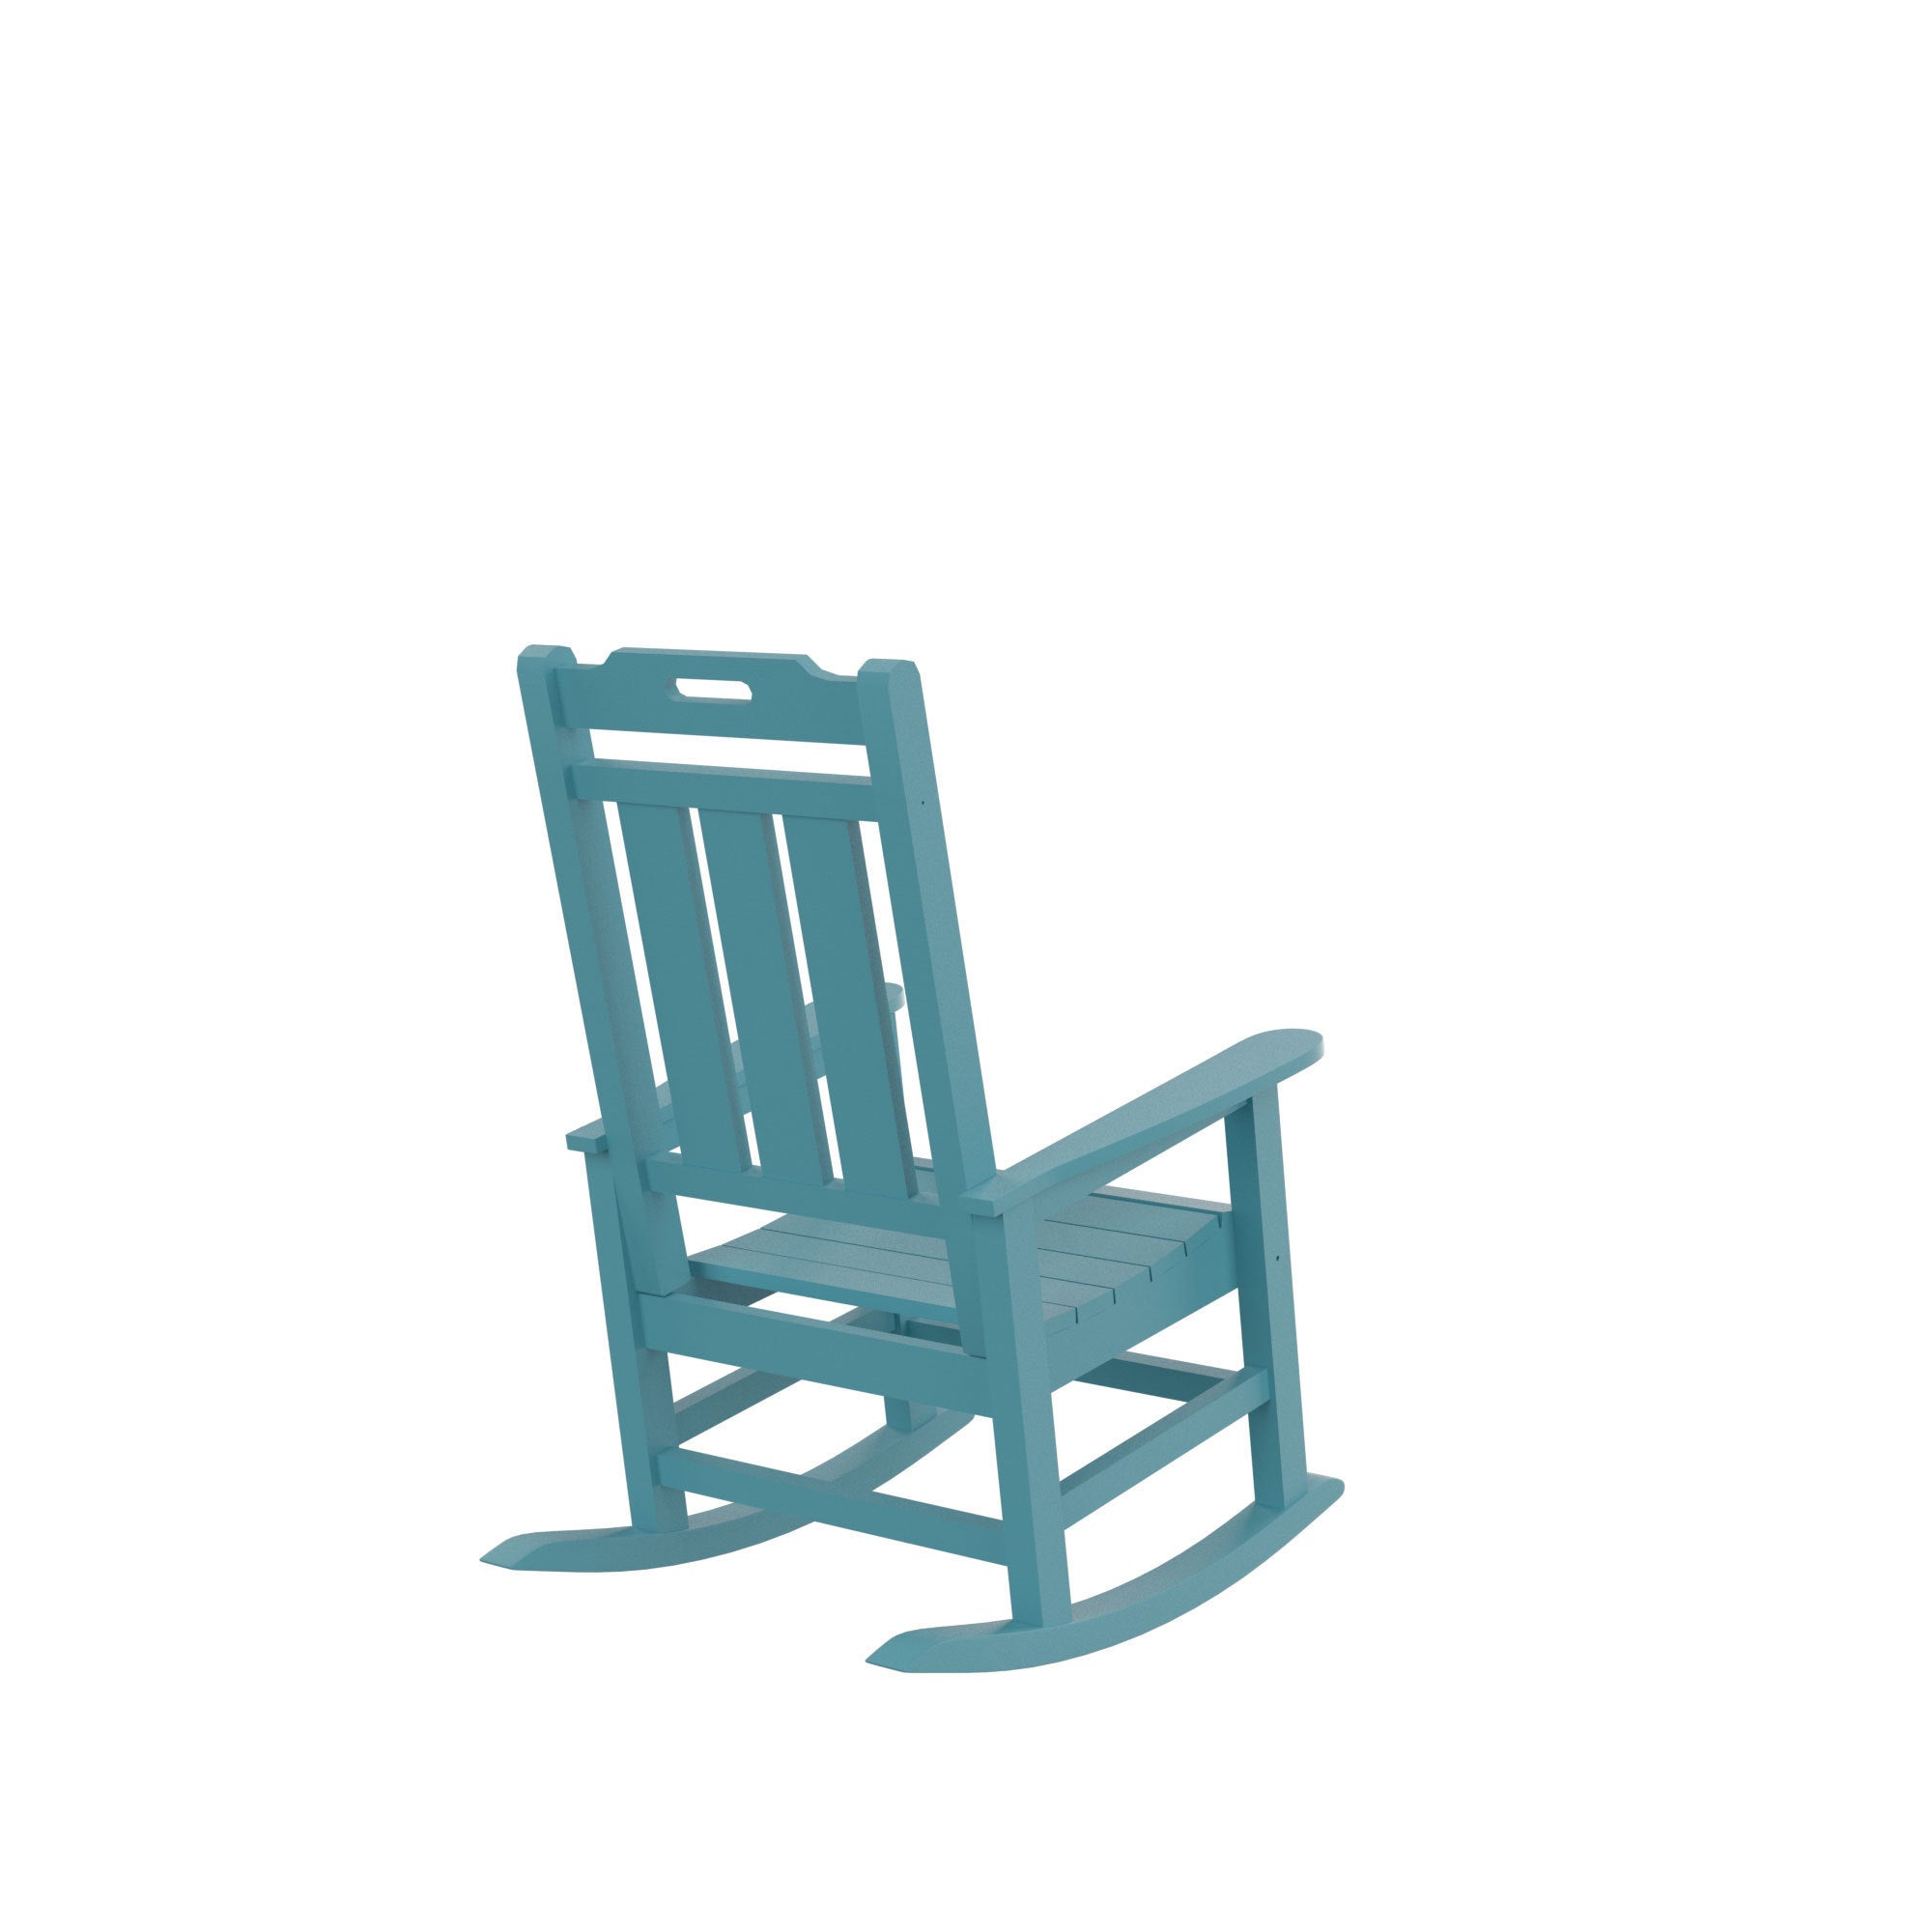 Presidential Rocking Chair HDPE Rocking Chair Fade Resistant Porch Rocking Chair (Blue)